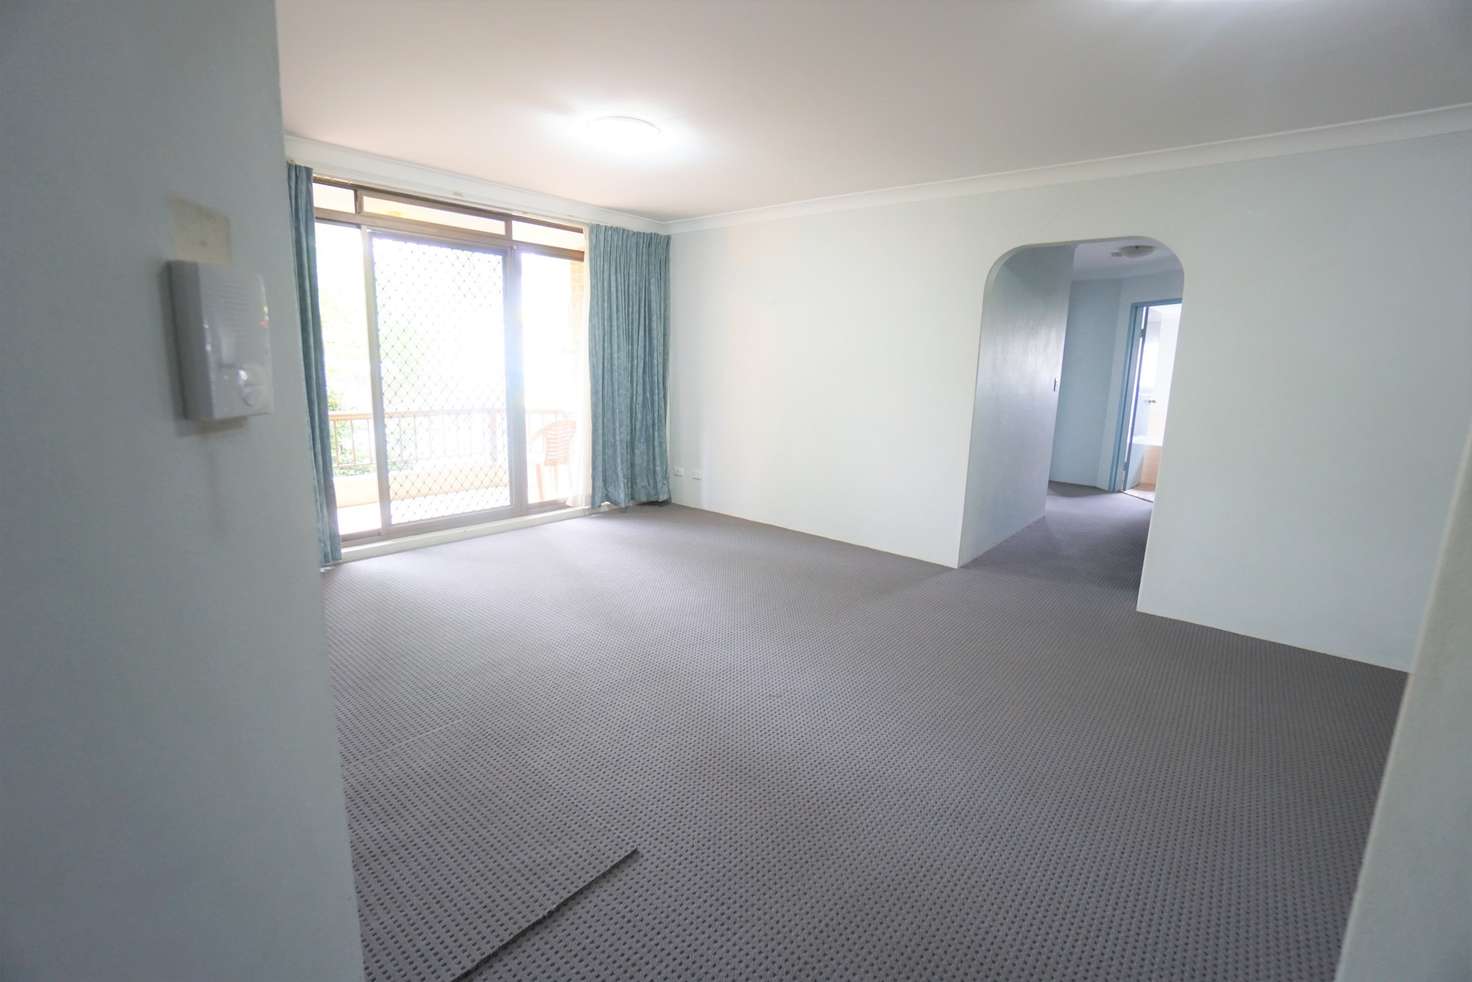 Main view of Homely apartment listing, 17/37 Carlingford Road, Epping NSW 2121